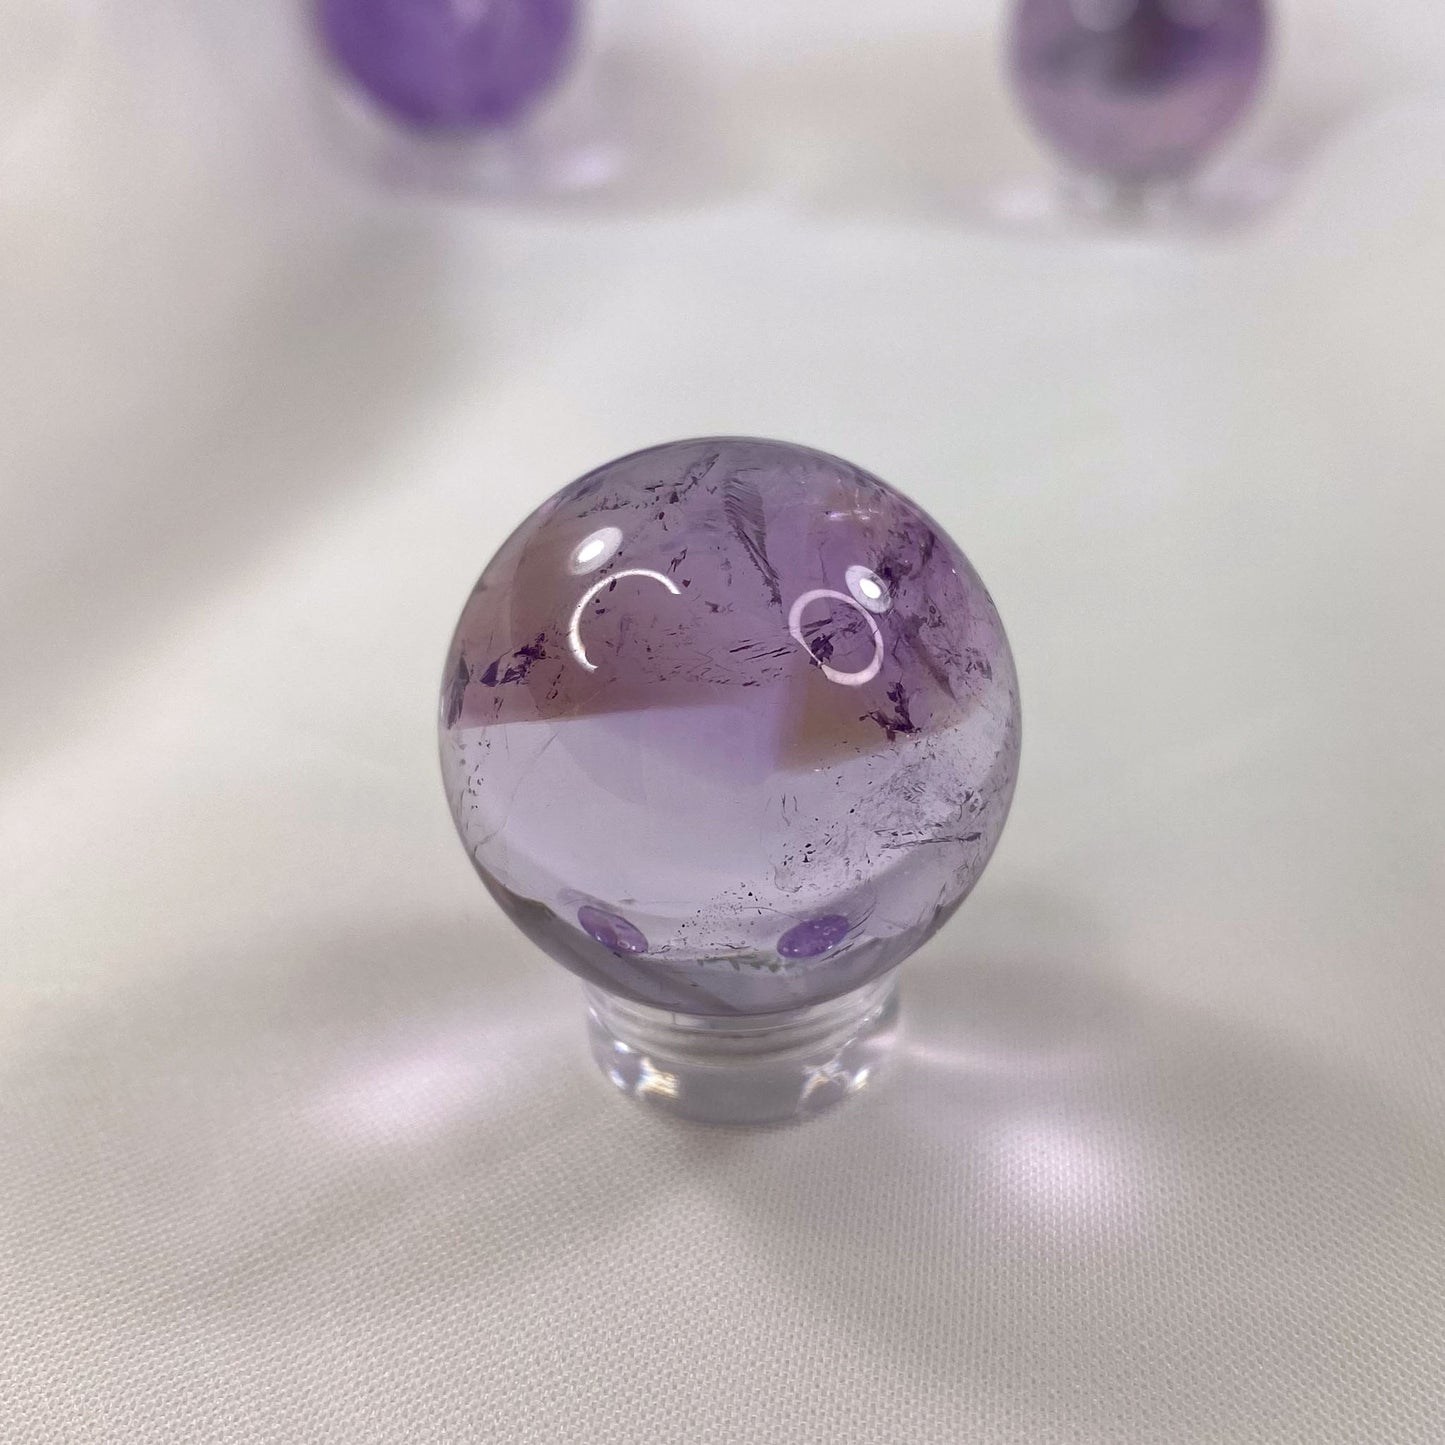 Ametrine Sphere with Trapiche-like Zoning